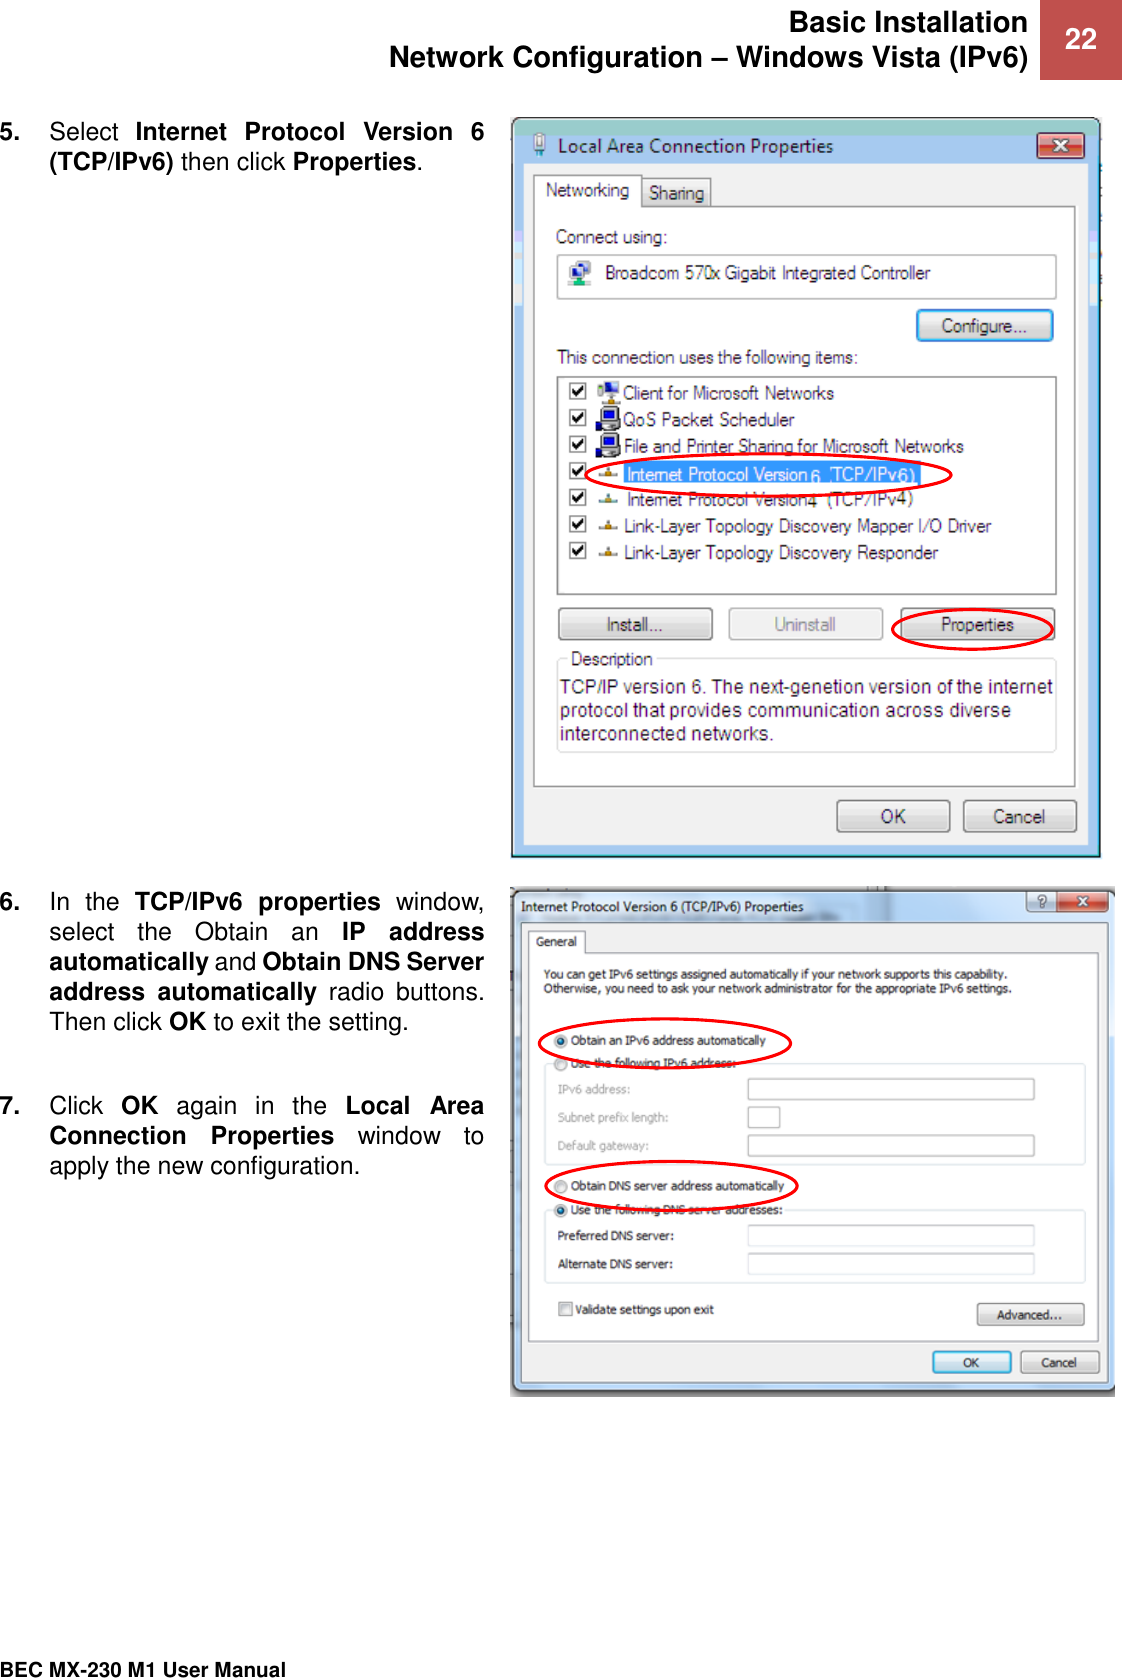 Basic Installation Network Configuration – Windows Vista (IPv6) 22   BEC MX-230 M1 User Manual  5. Select  Internet  Protocol  Version  6 (TCP/IPv6) then click Properties.  6. In  the  TCP/IPv6  properties  window, select  the  Obtain  an  IP  address automatically and Obtain DNS Server address  automatically  radio  buttons. Then click OK to exit the setting.  7. Click  OK  again  in  the  Local  Area Connection  Properties  window  to apply the new configuration.   